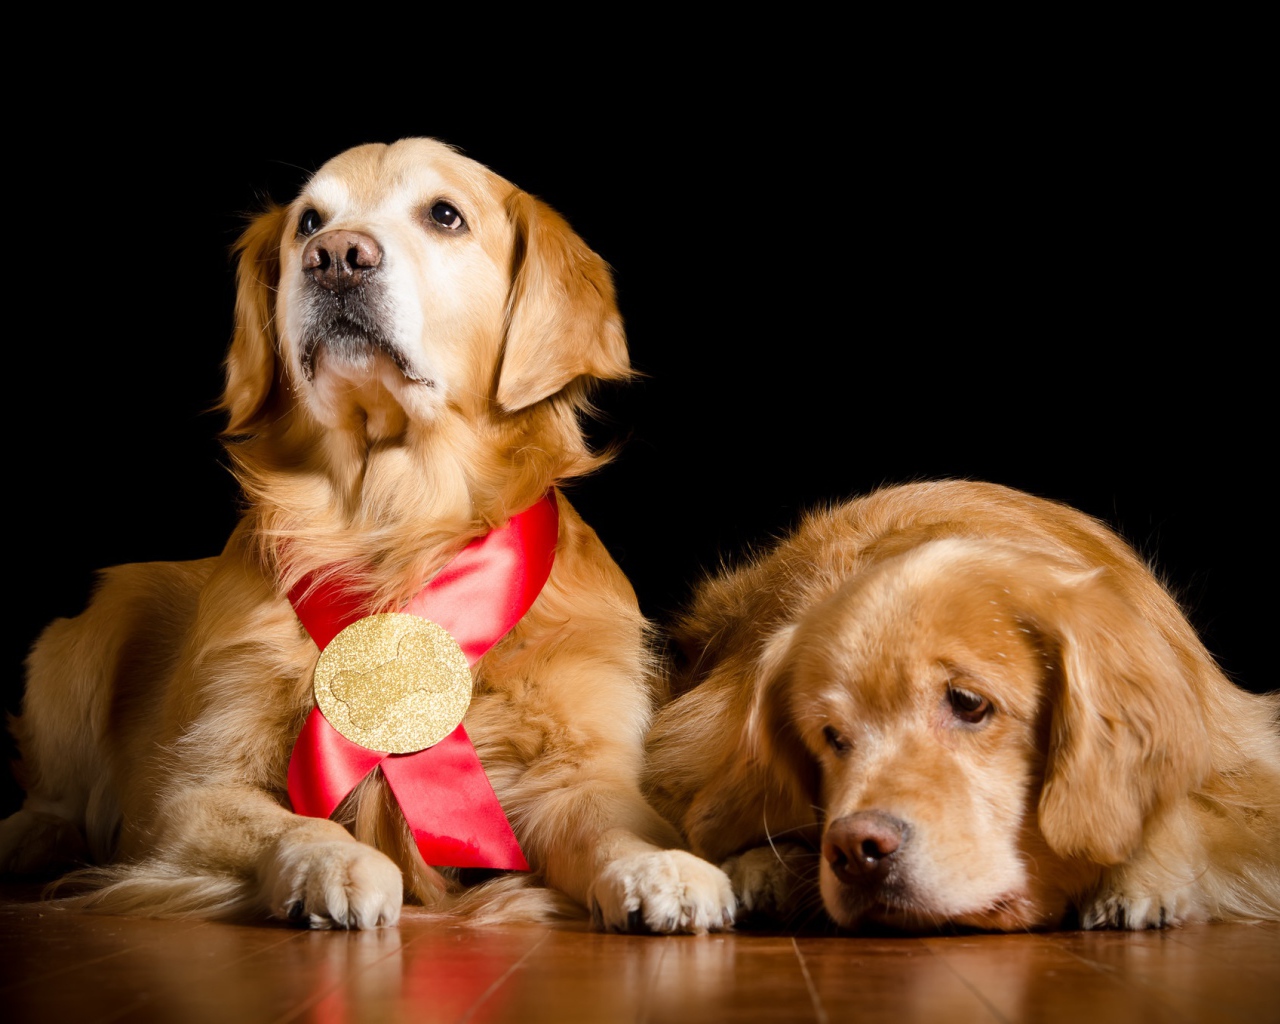 Two golden retriever on the floor on a black background